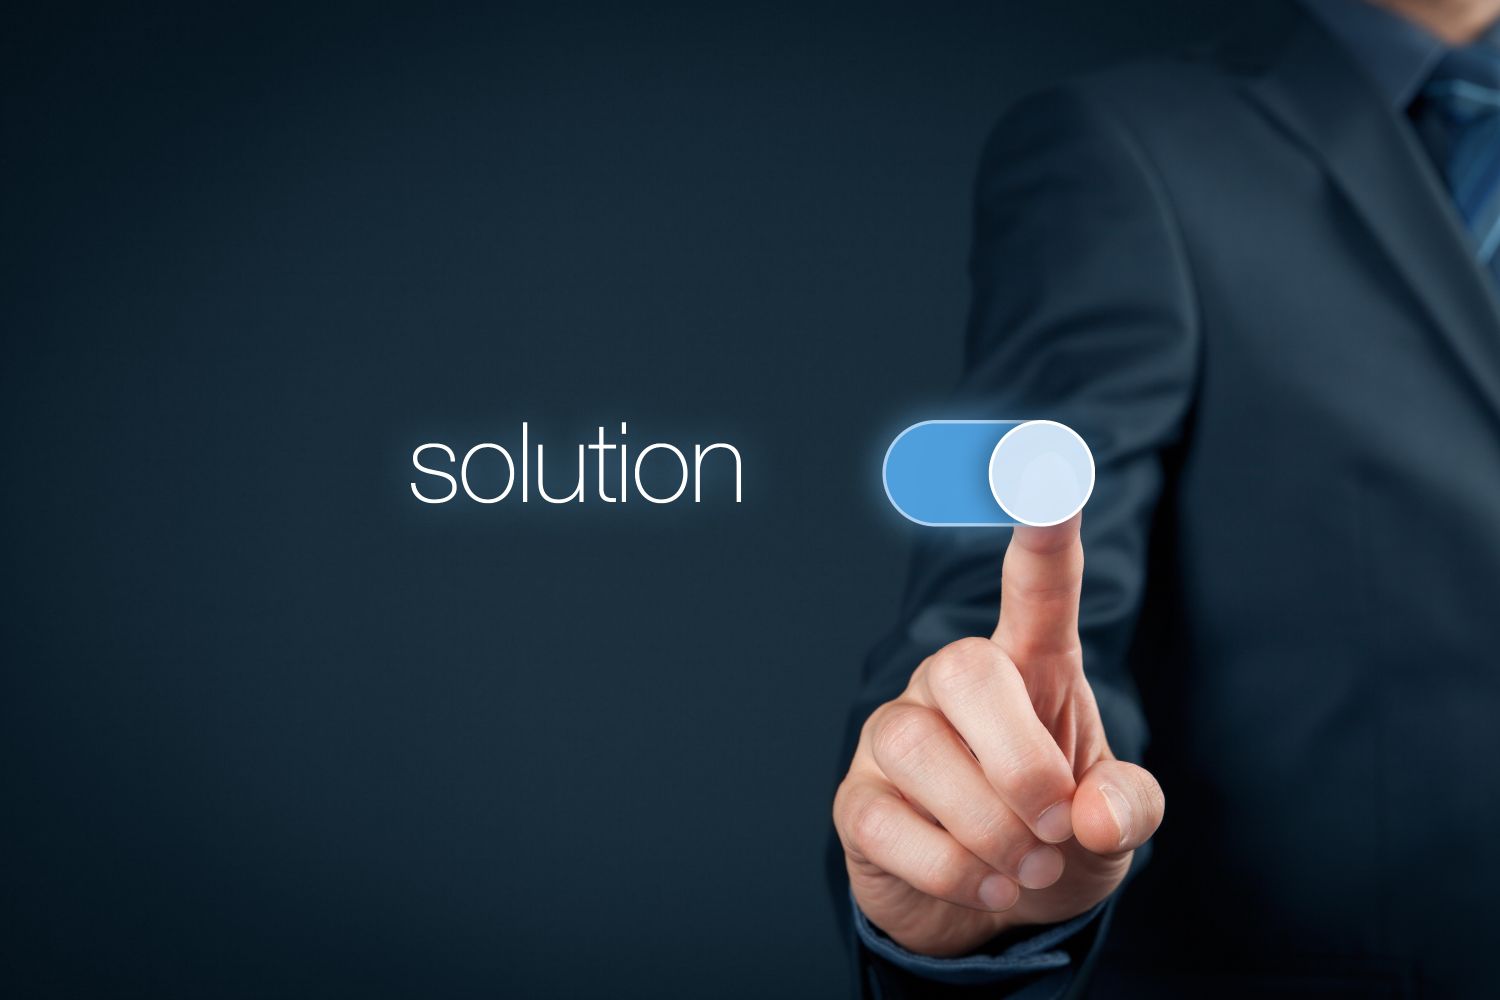 Image of a man in a suit pressing a toggle button next to the word, "solution"